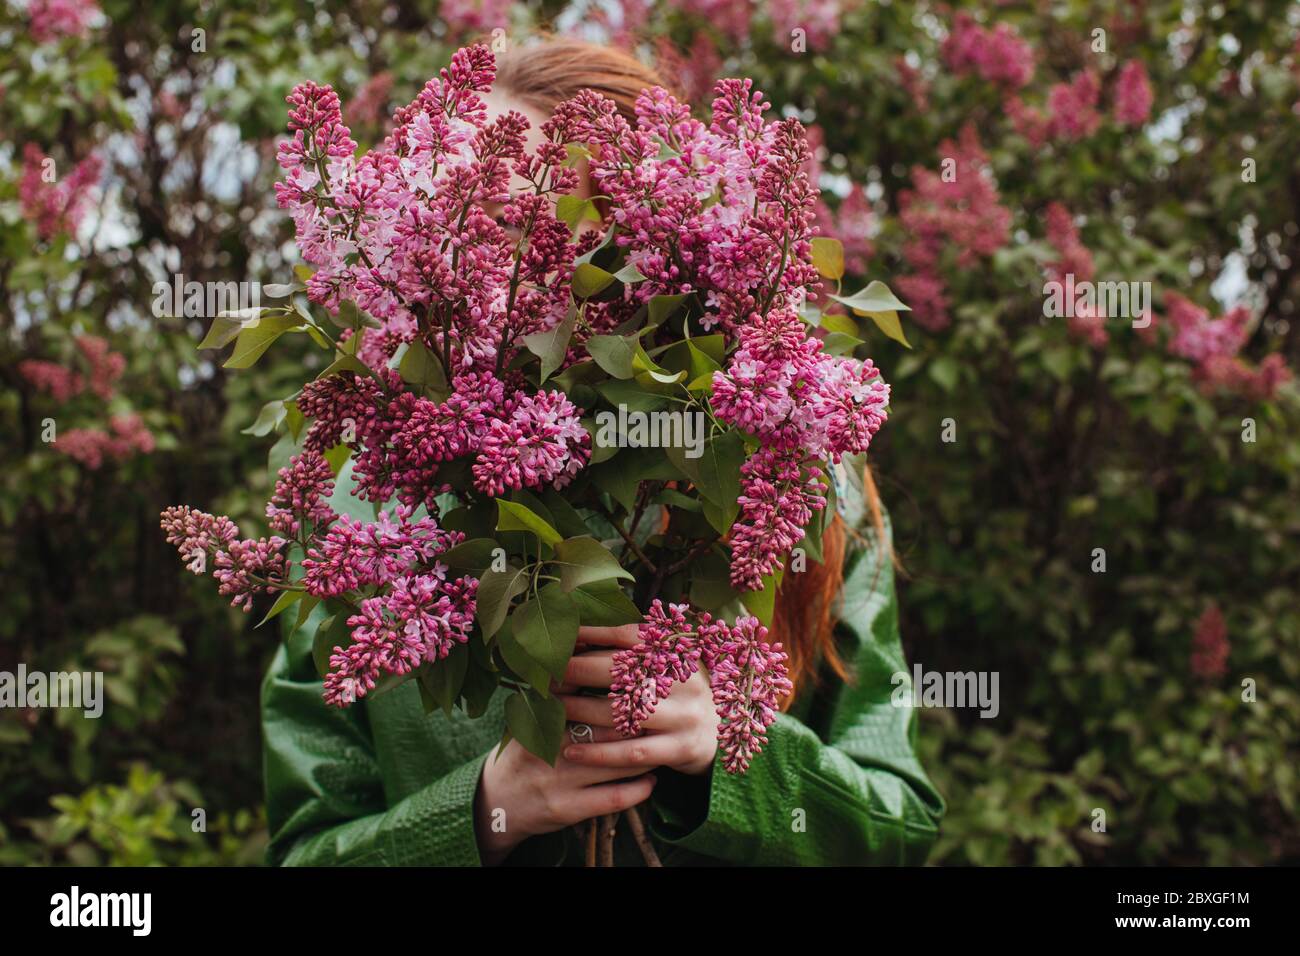 Woman standing outdoors holding freshly picked flowers, Russia Stock Photo